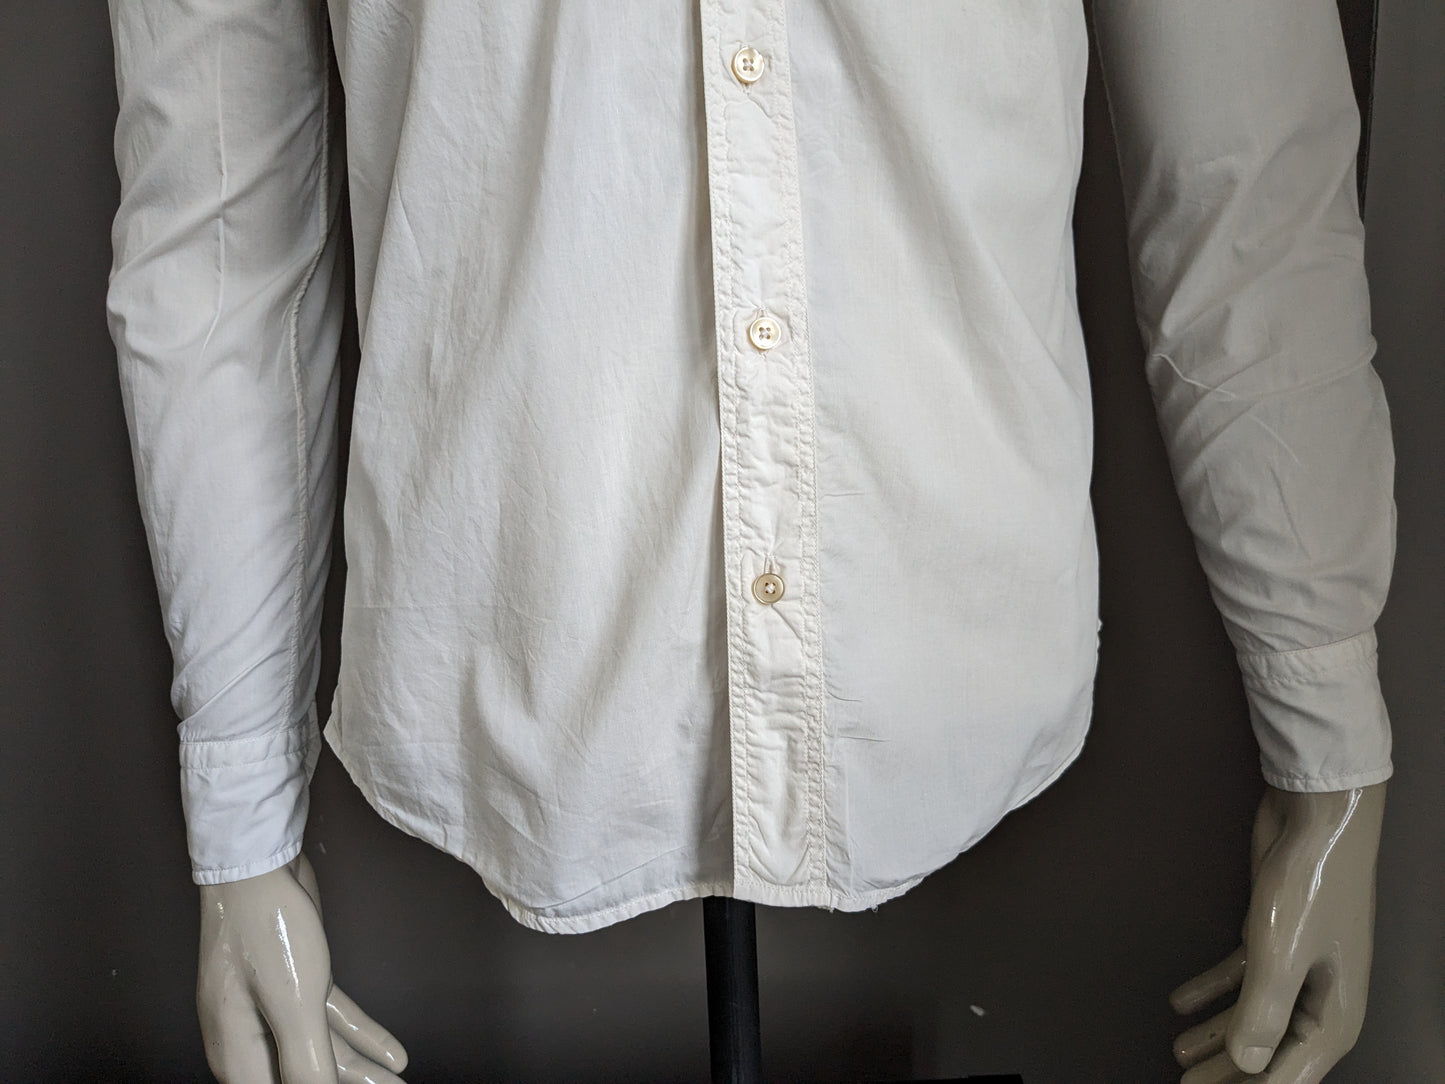 Xacus shirt. Beige colored. Size 38 / S. Tailored fit.